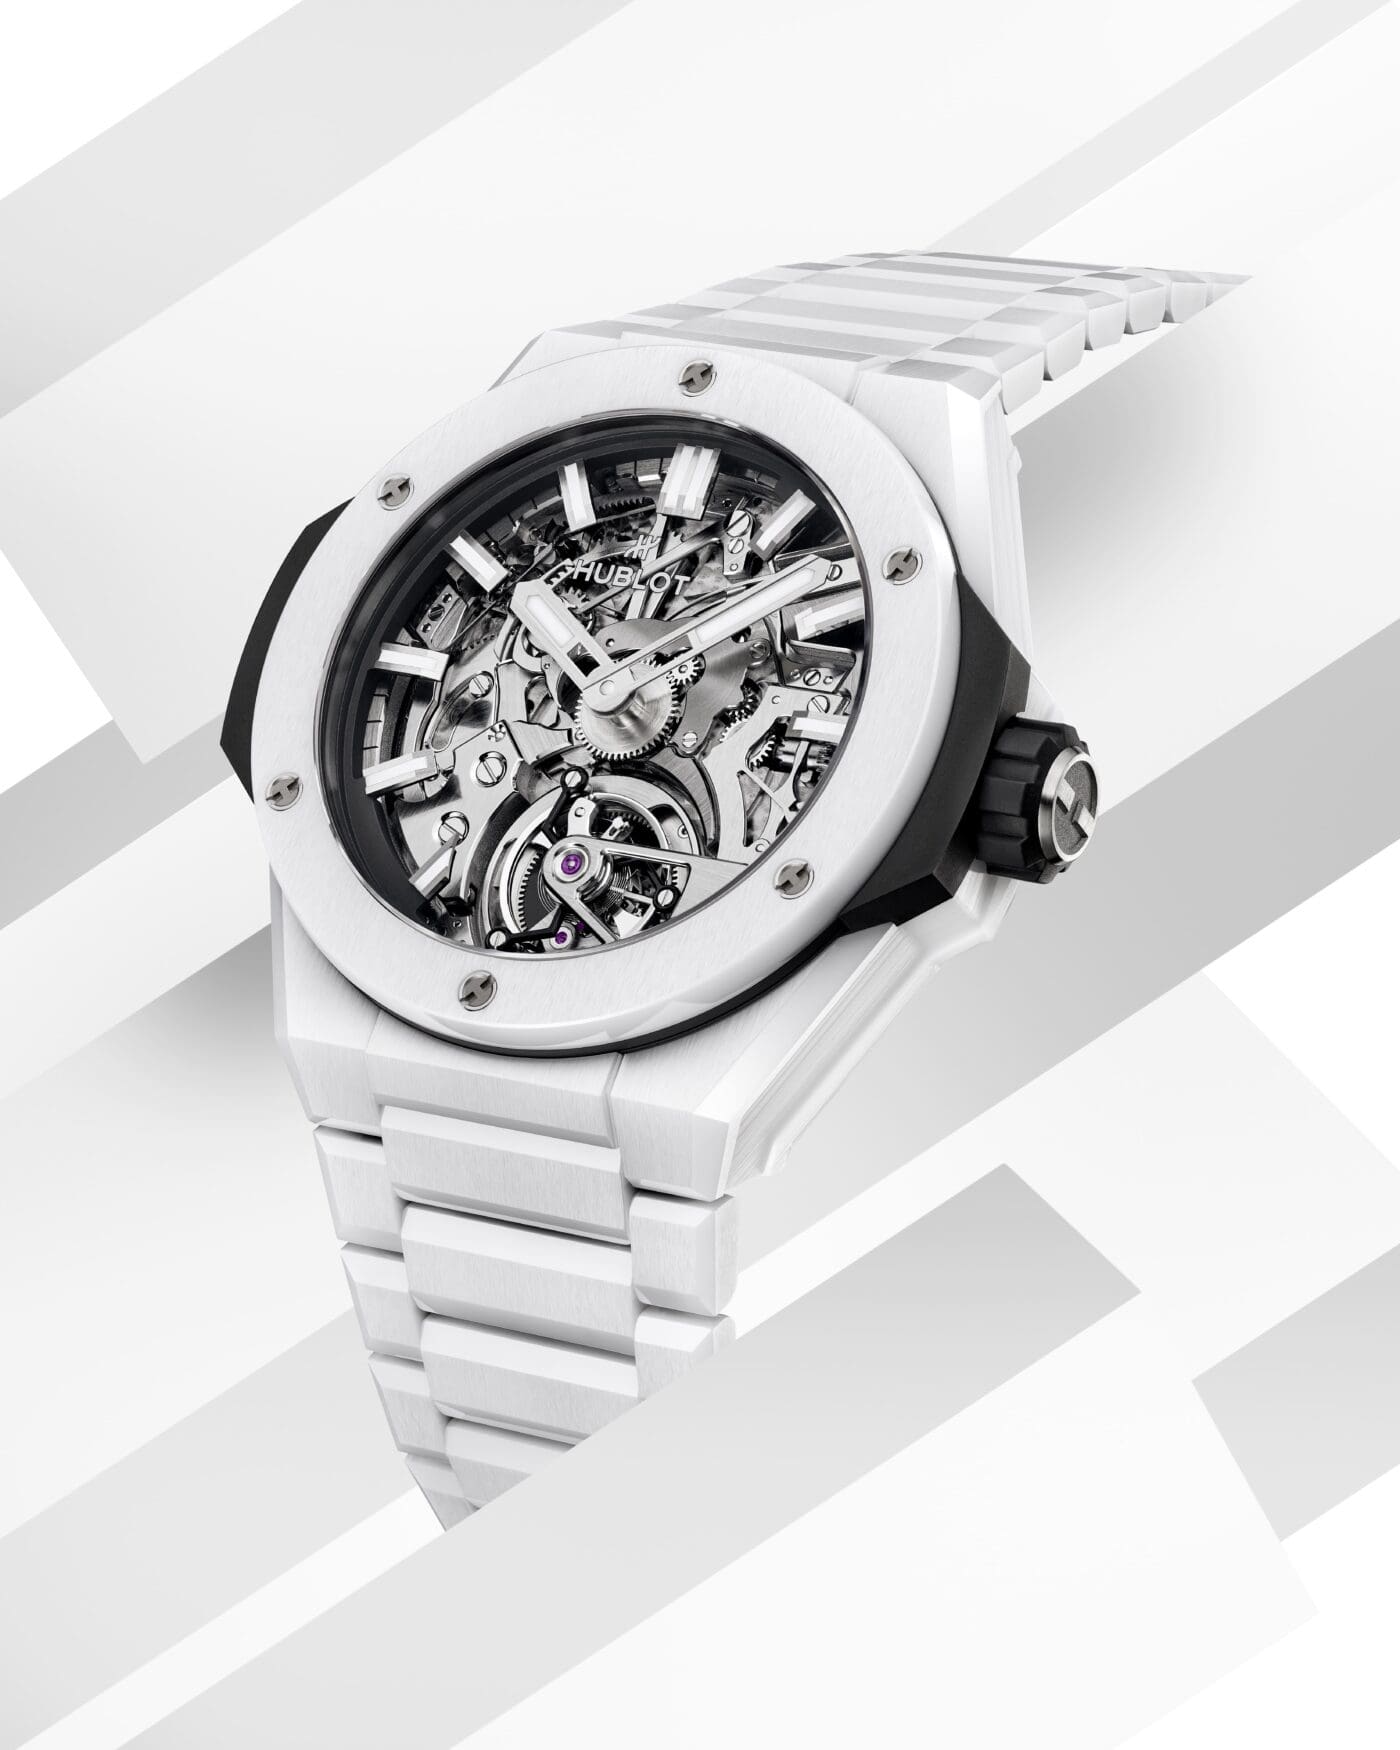 INTRODUCING: Hublot debuts the first-ever 100% ceramic-cased minute repeater